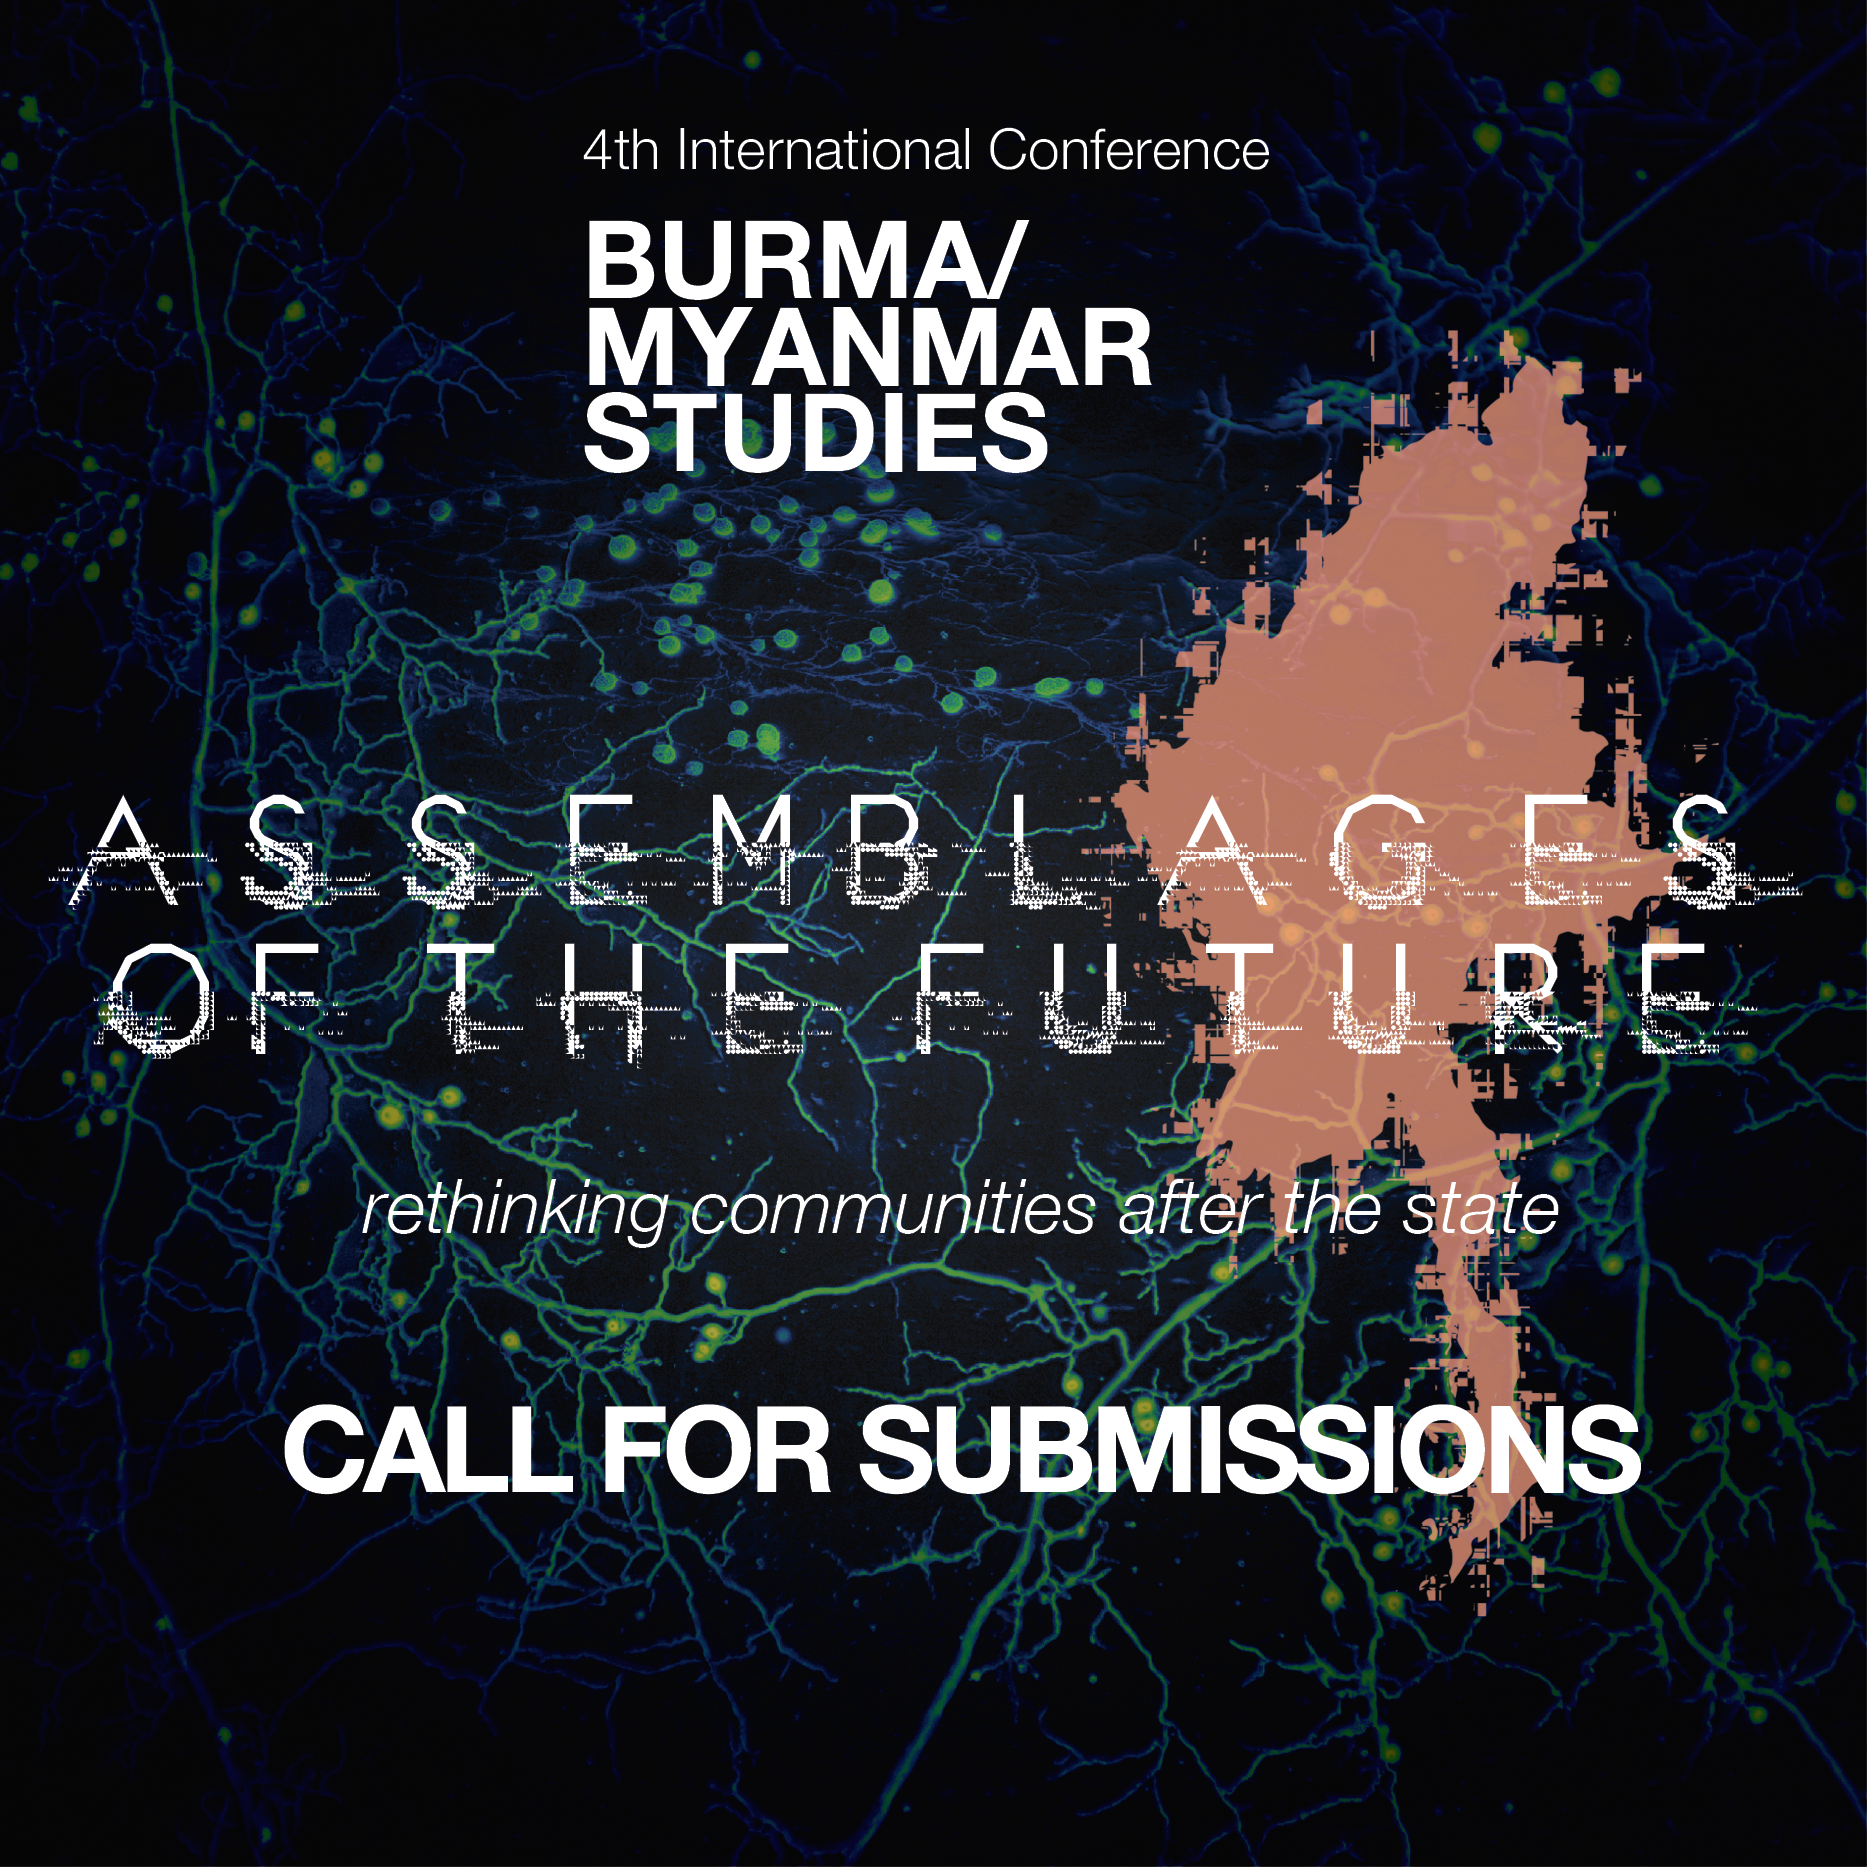 Call for Submissions to ICBMS4